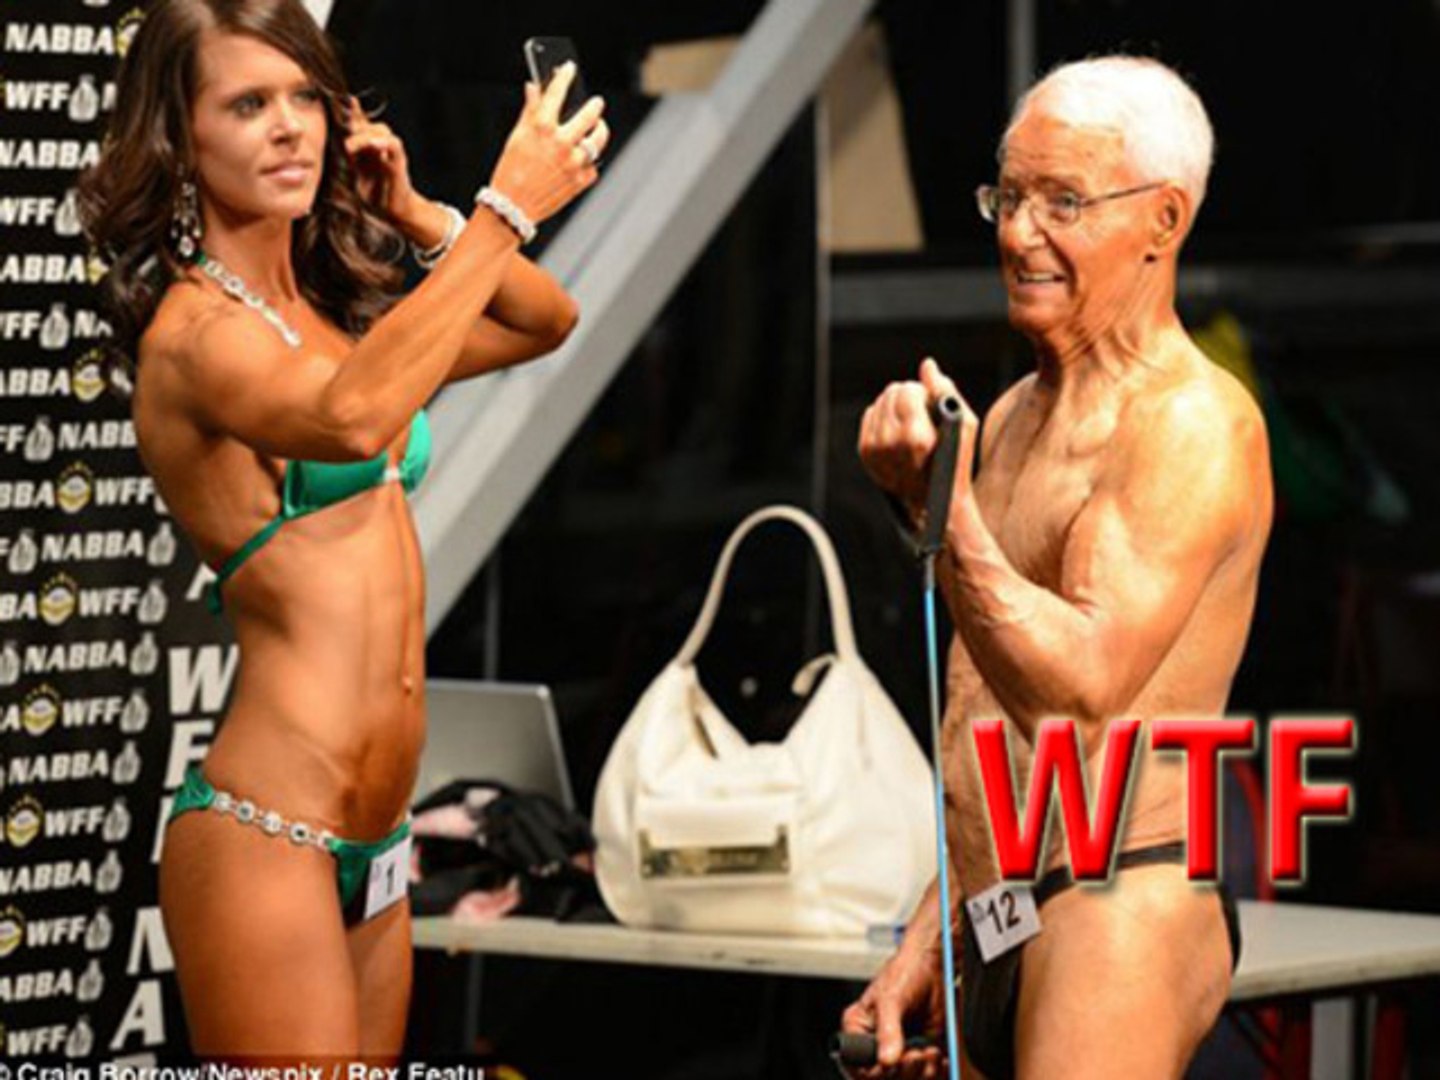 Wtf Ray Moon The Oldest Bodybuilder Back In Action Video Dailymotion Images, Photos, Reviews